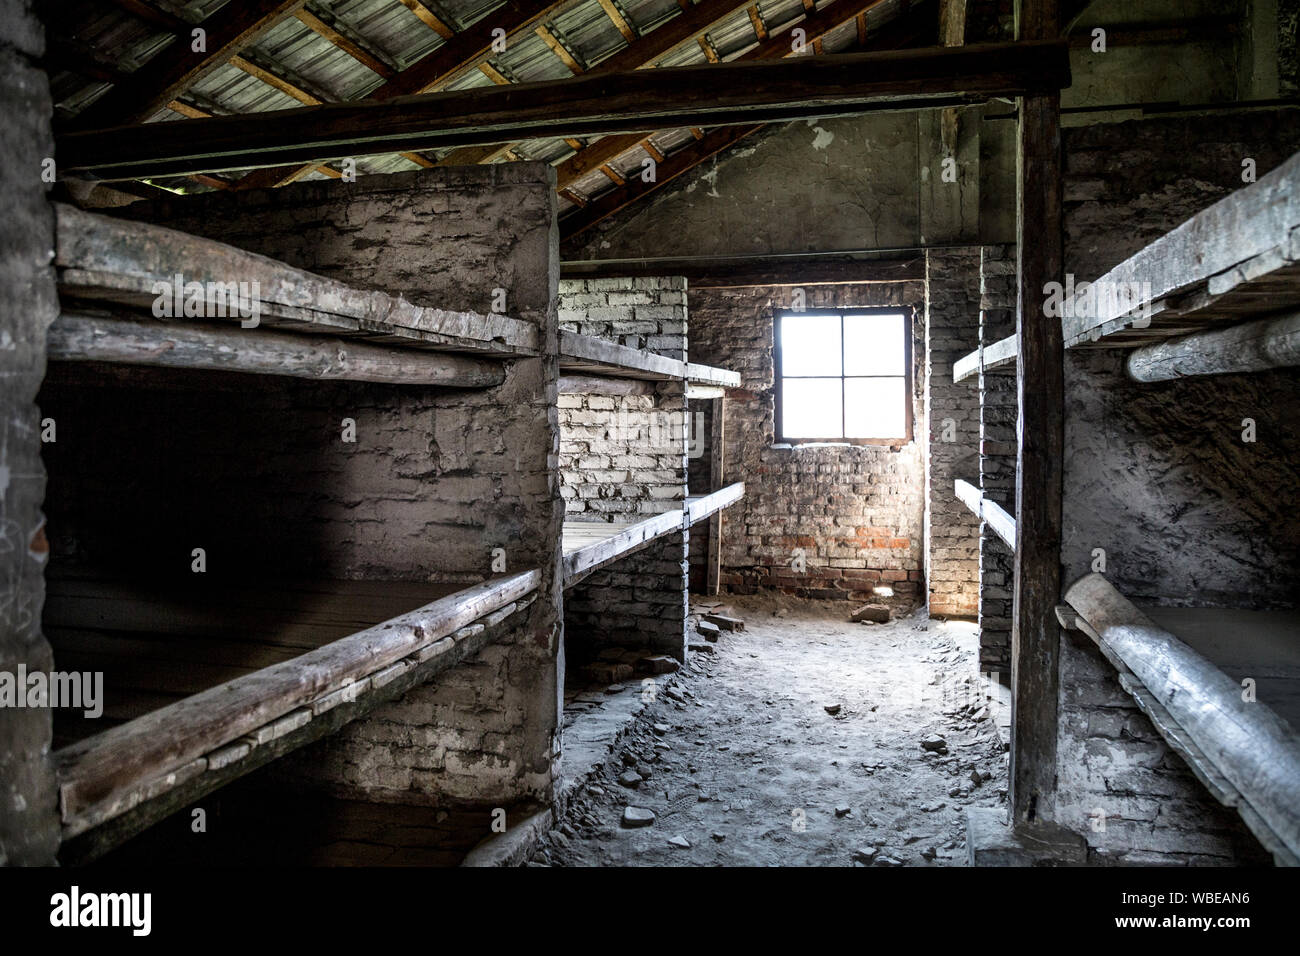 Interior of barracks where the prisoners were kept at Auschwitz-Birkenau concentration camp, Poland Stock Photo